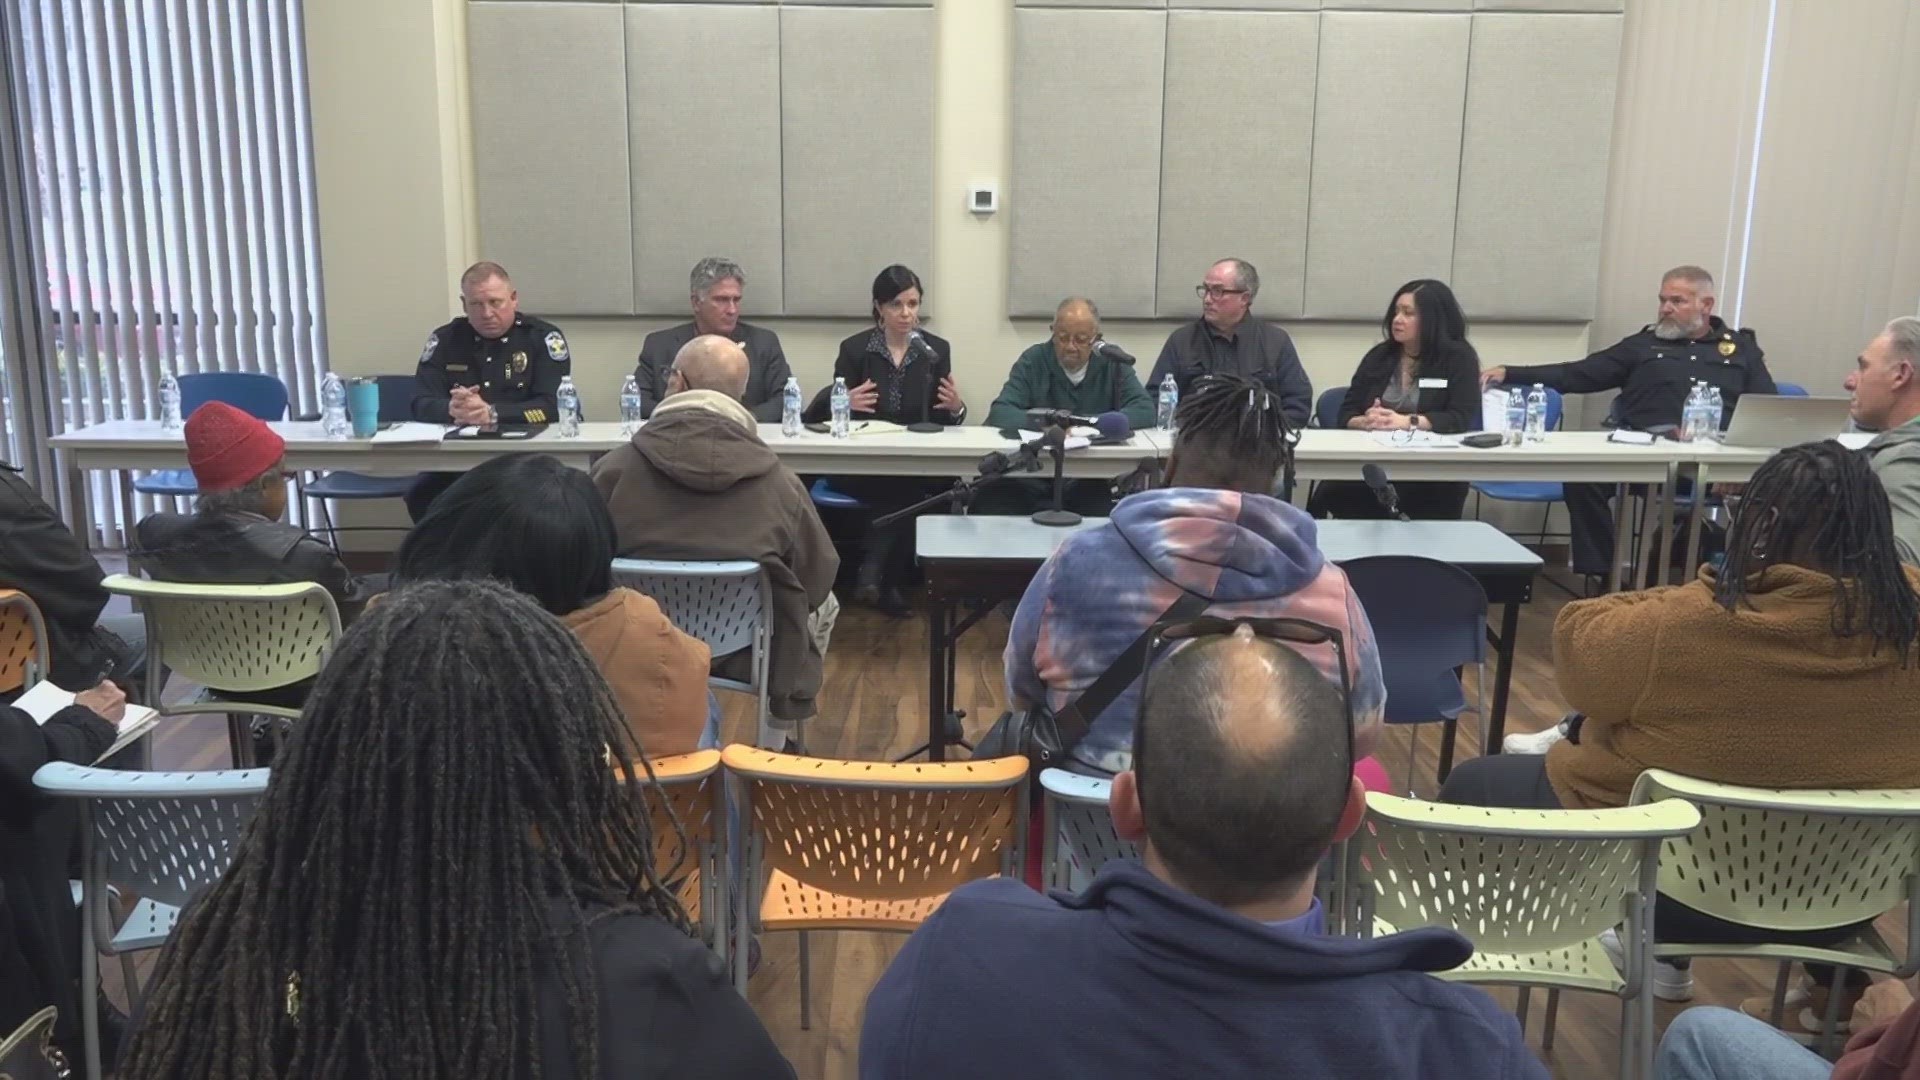 Tenants, city leaders and Louisville advocates spoke face-to-face to the people in charge of keeping Dosker Manor safe and expressed their concerns.